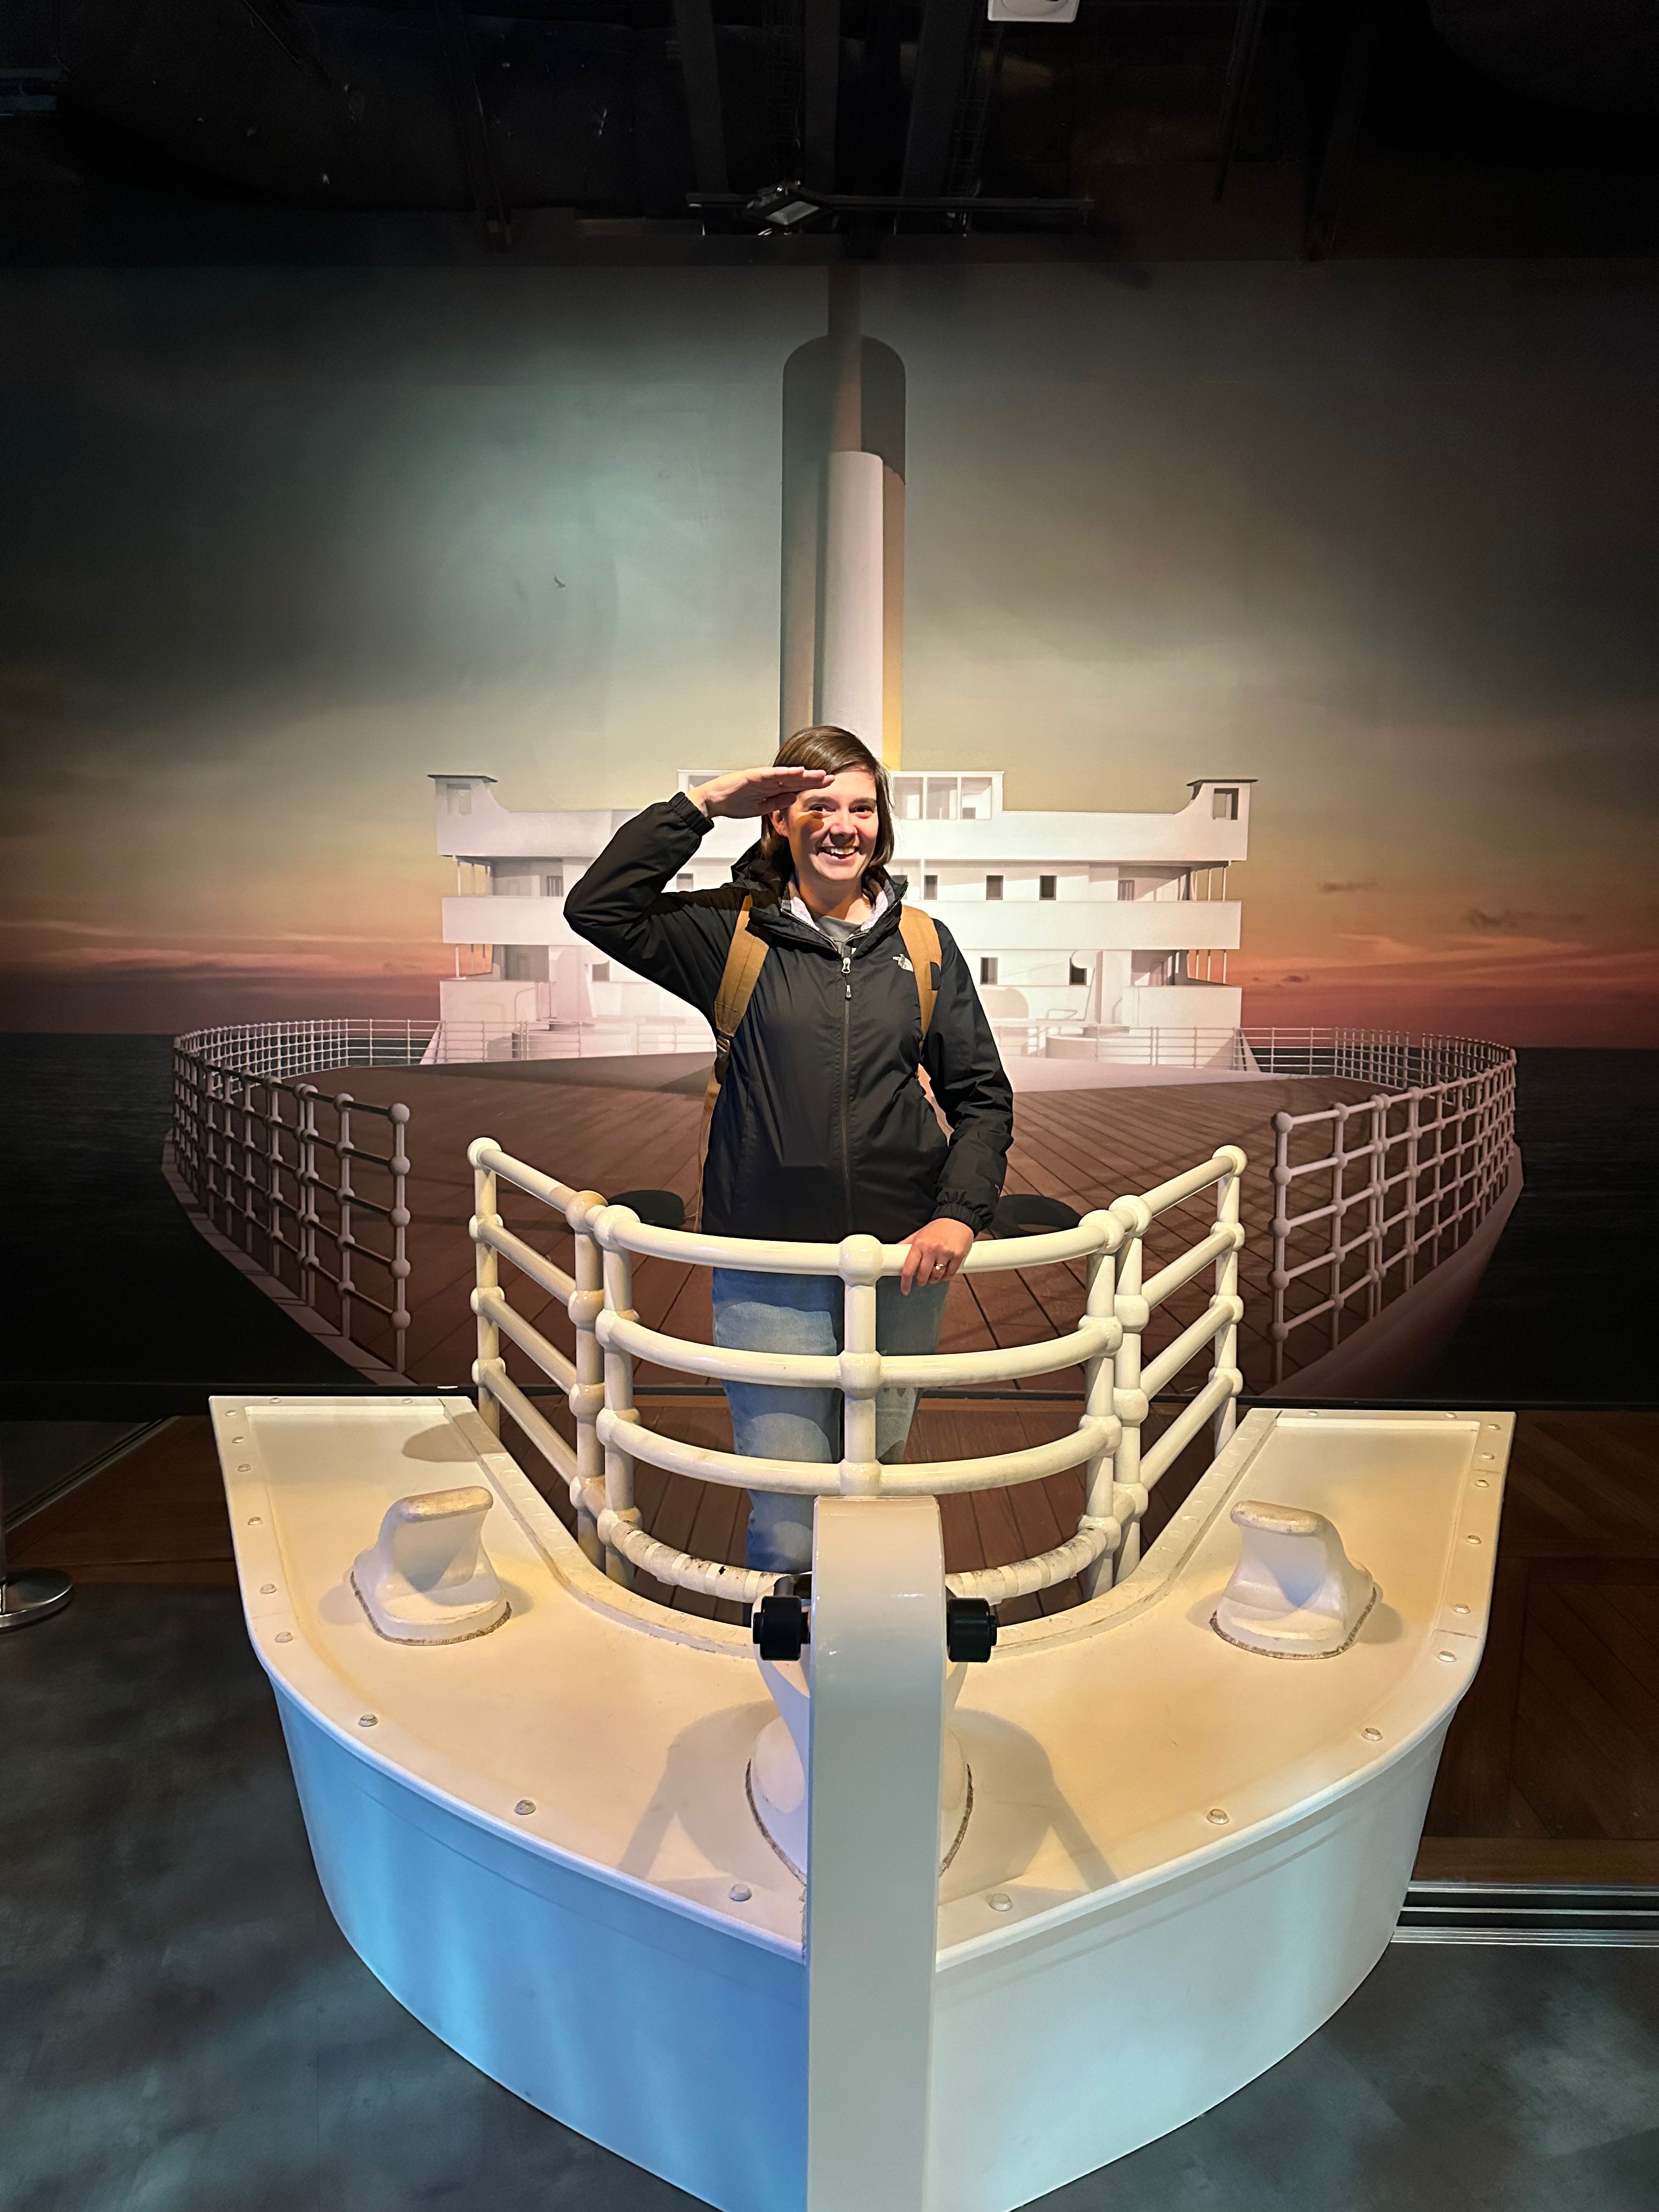 A woman making a salute on the Titanic at the Titanic Museum